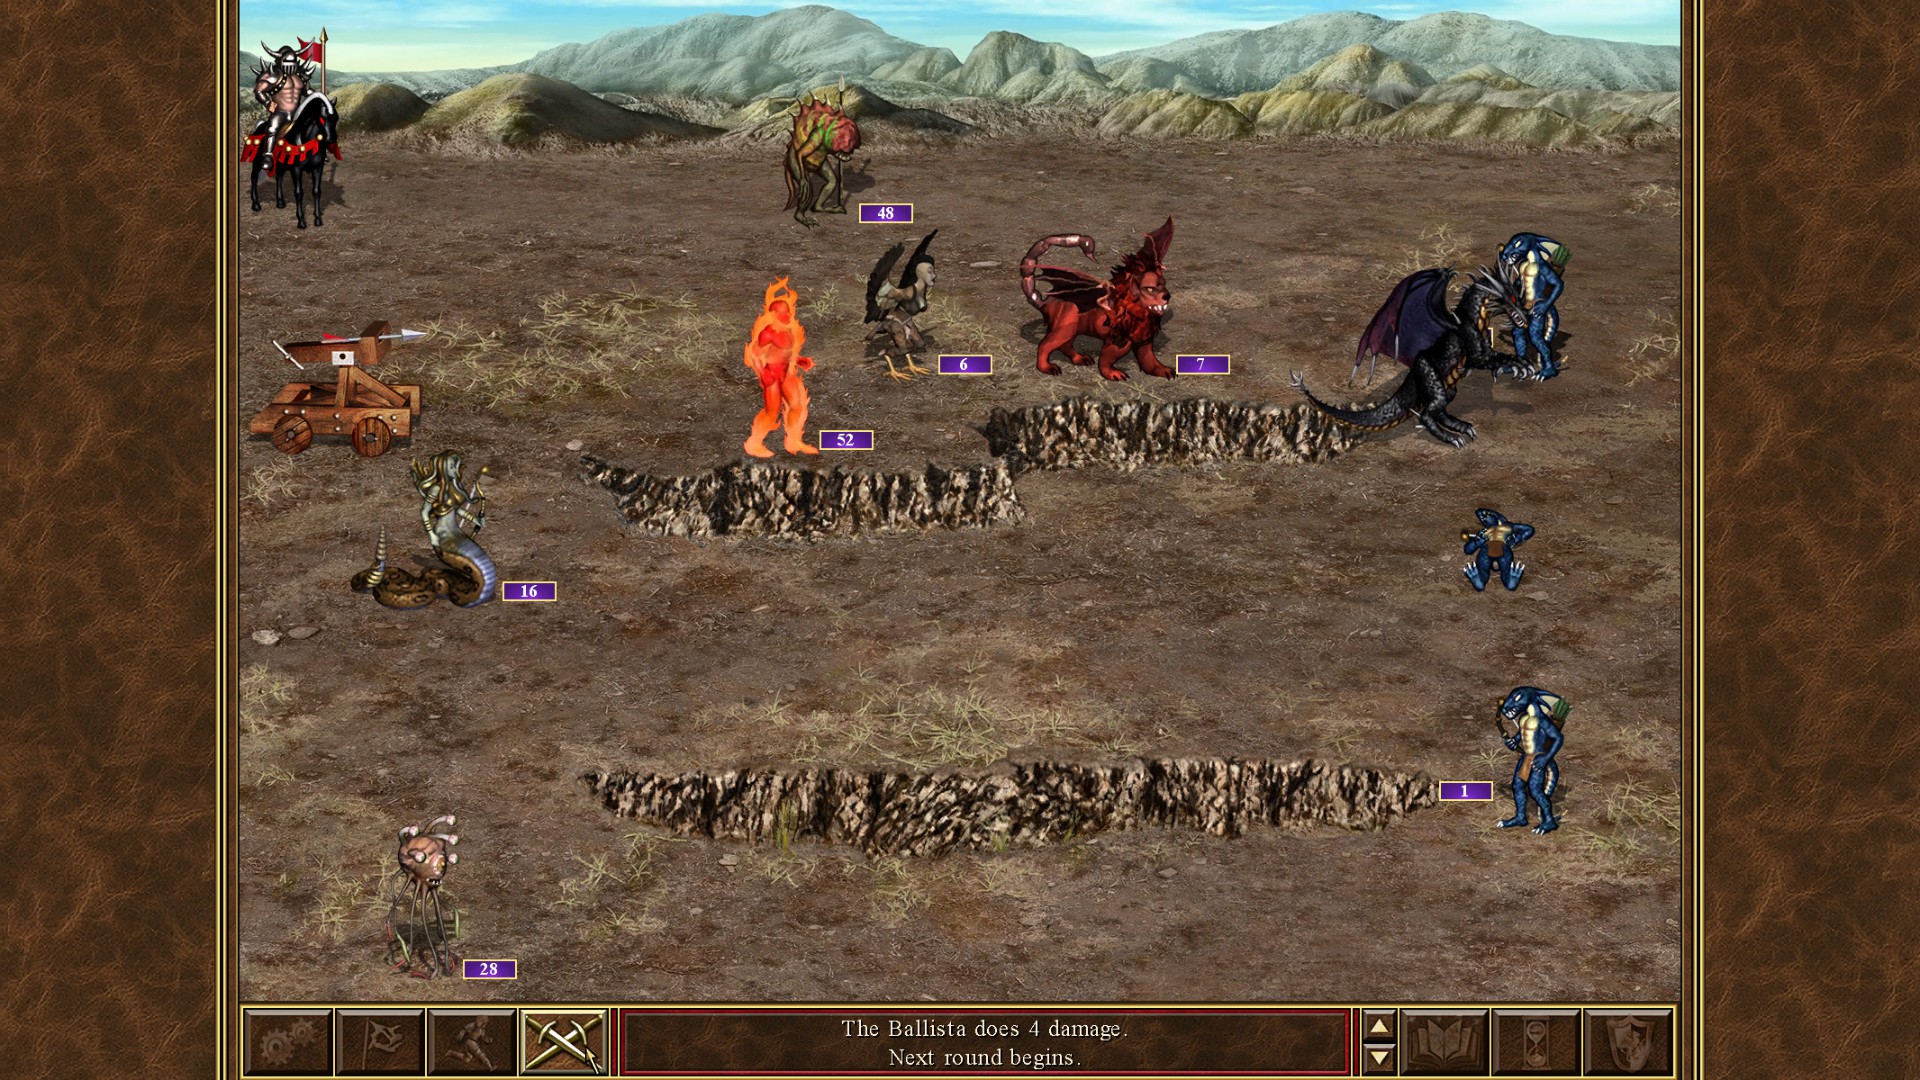 heroes of might and magic 3 online download